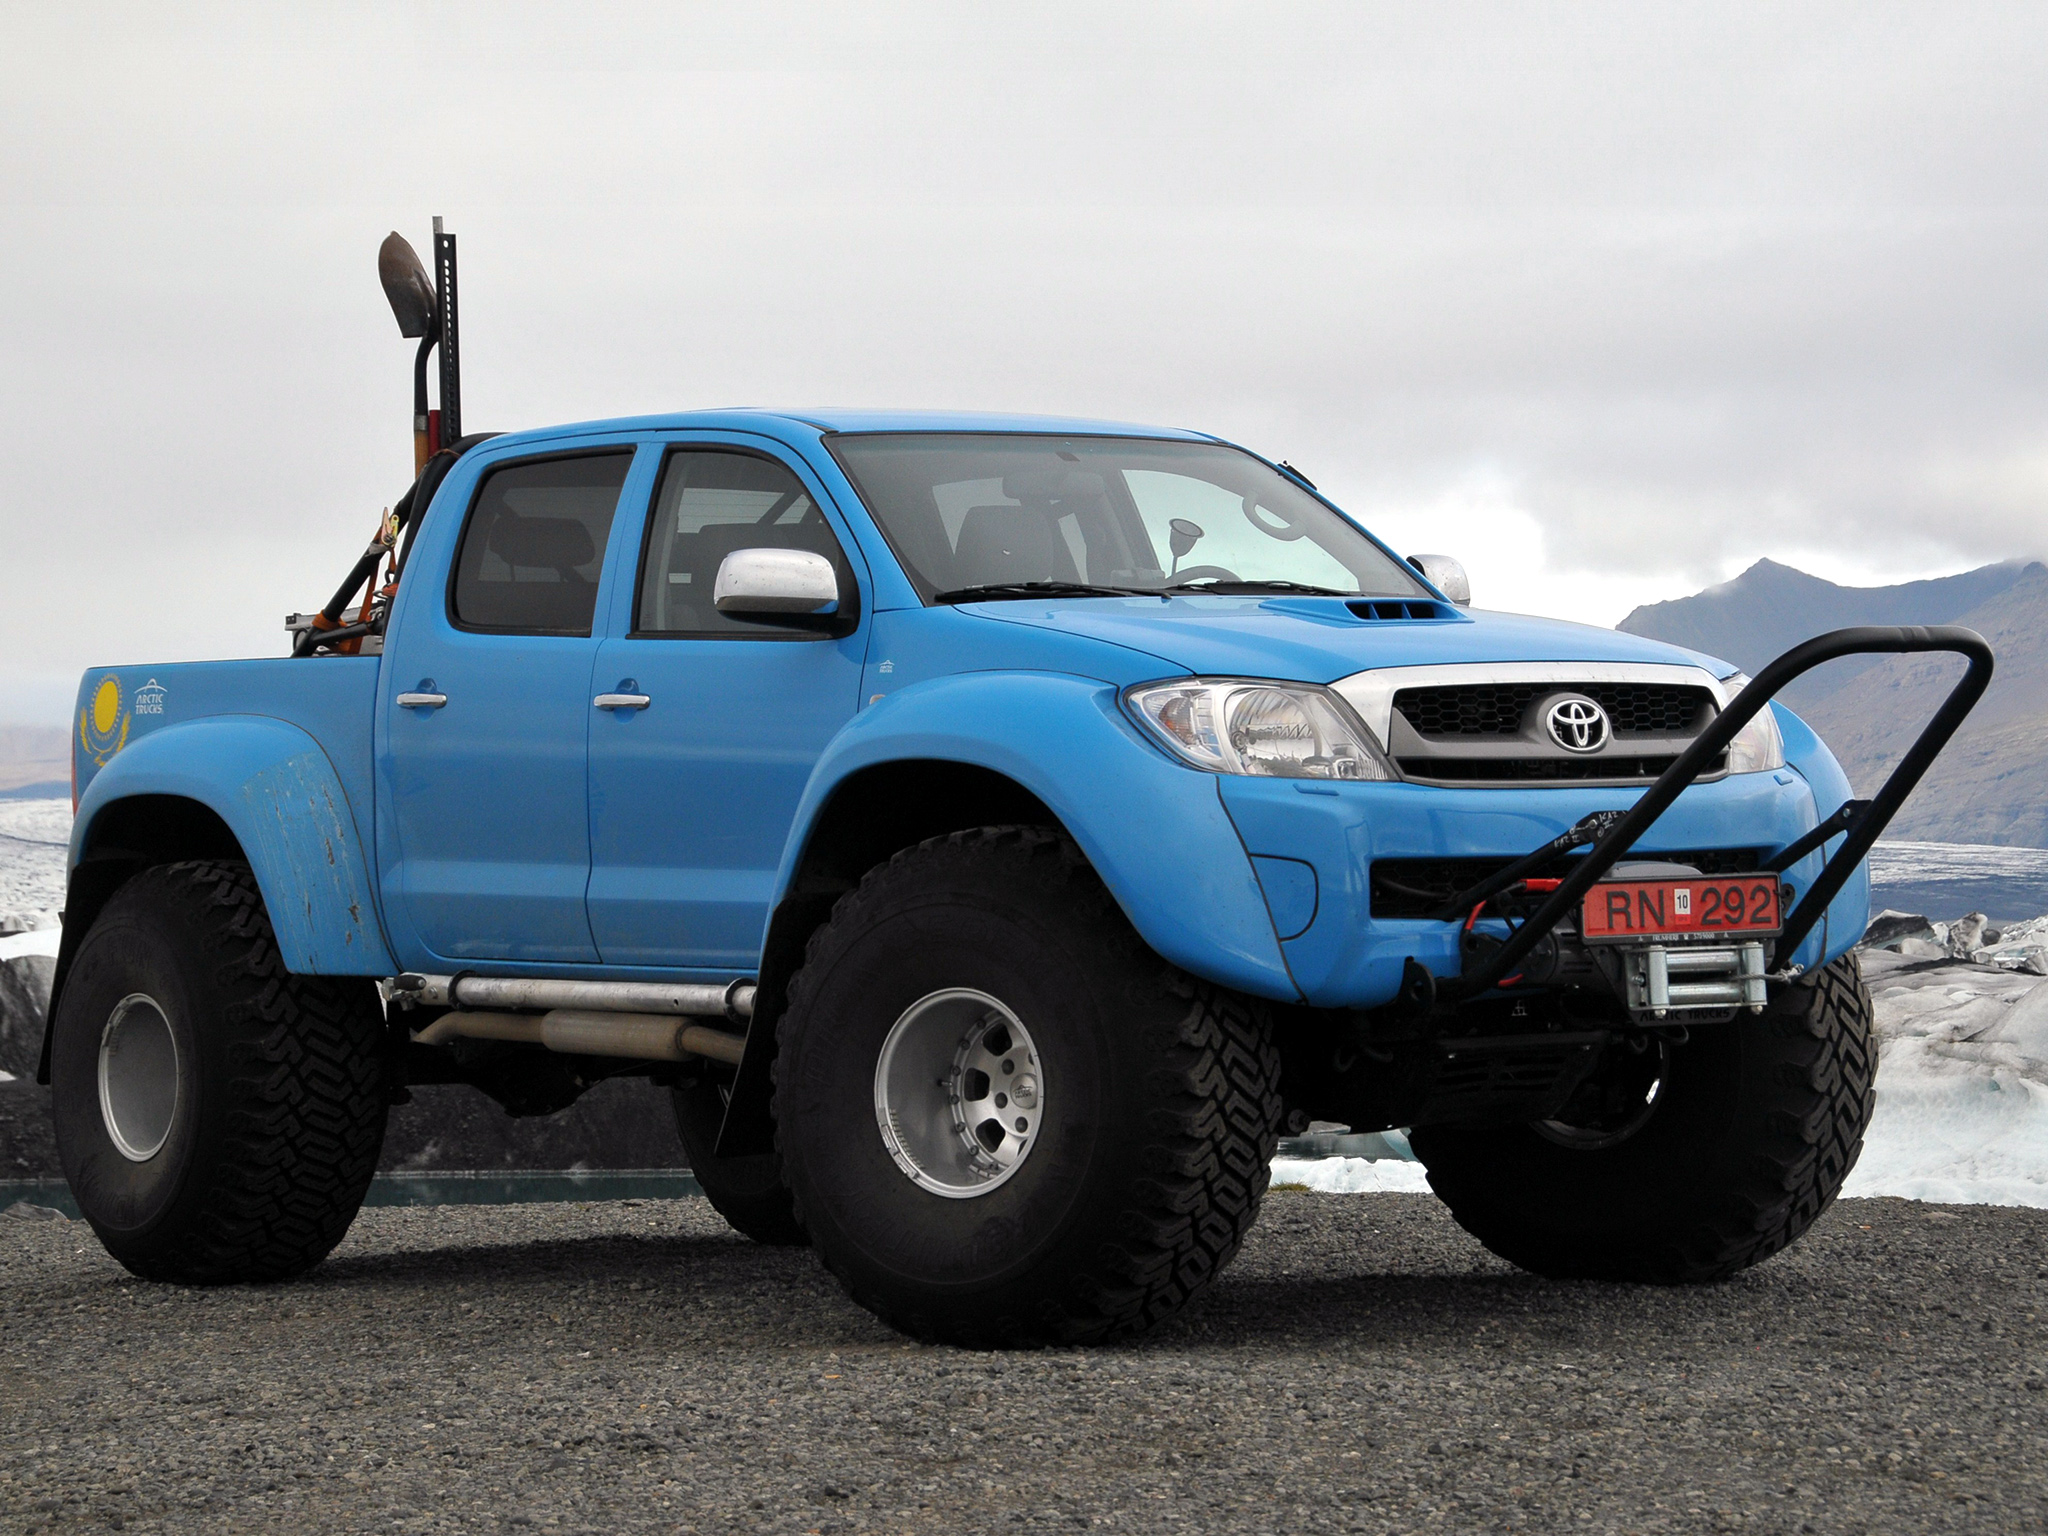 Toyota Hilux - interesting news with the best Toyota Hilux pictures on